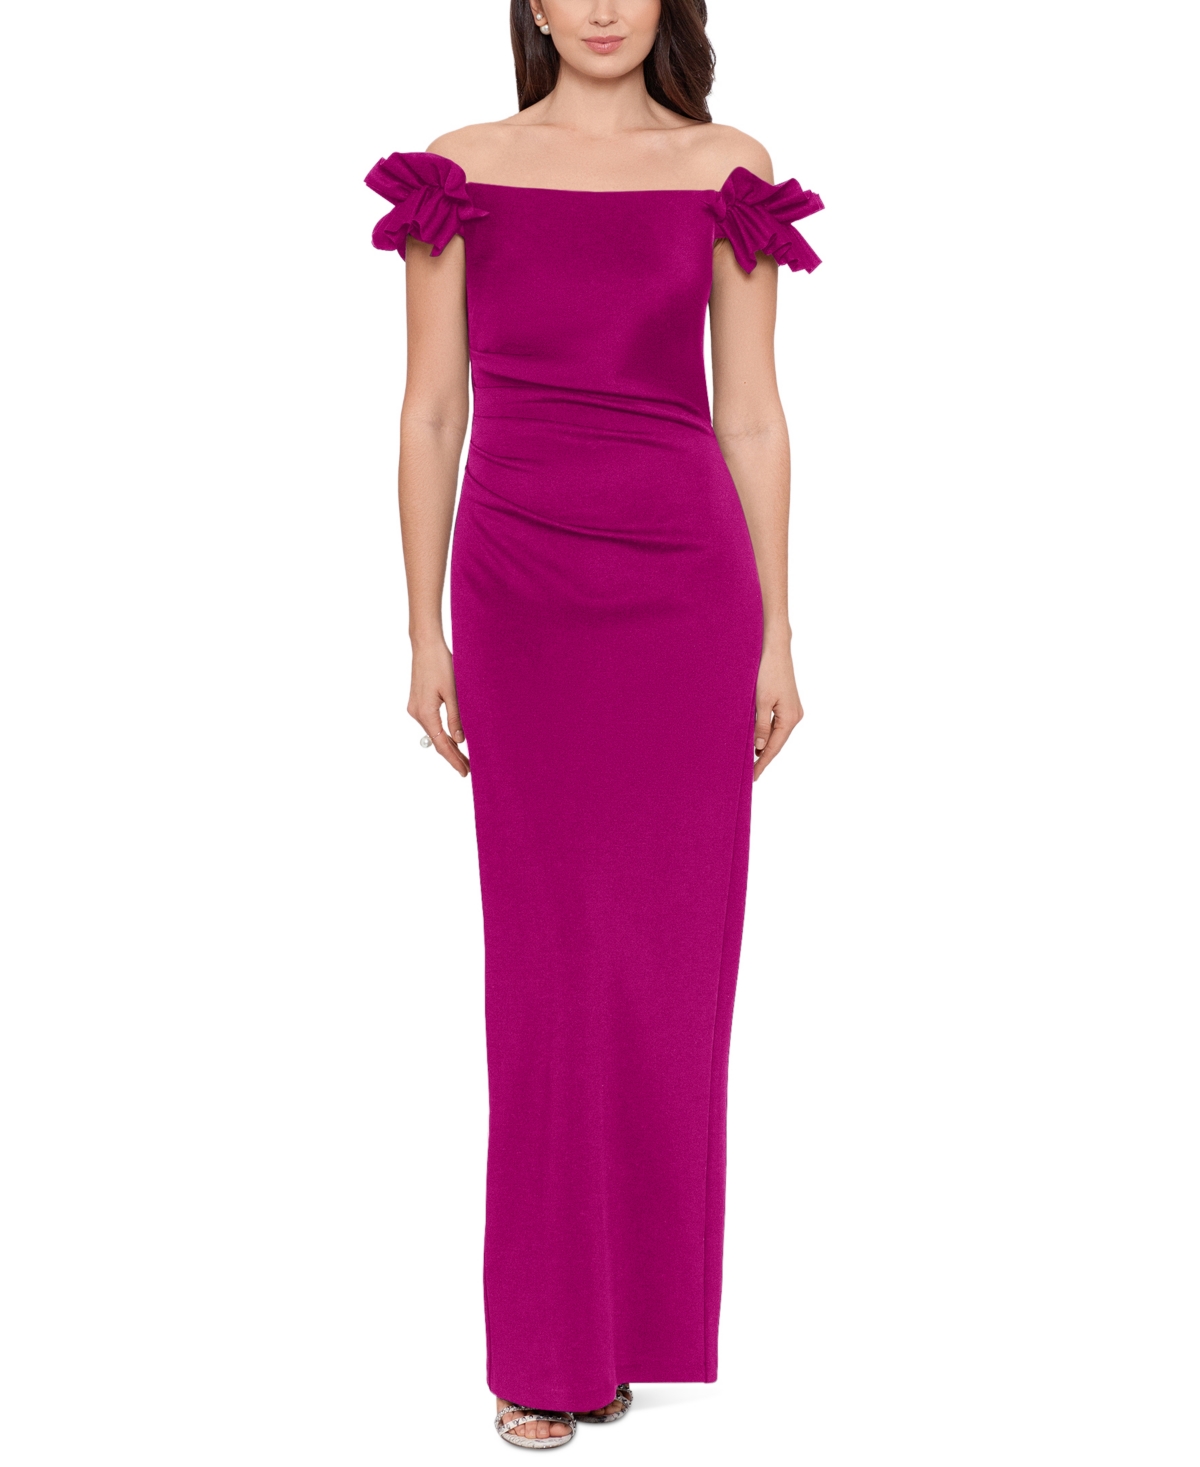 Off-The-Shoulder Ruffle Dress - Orchid